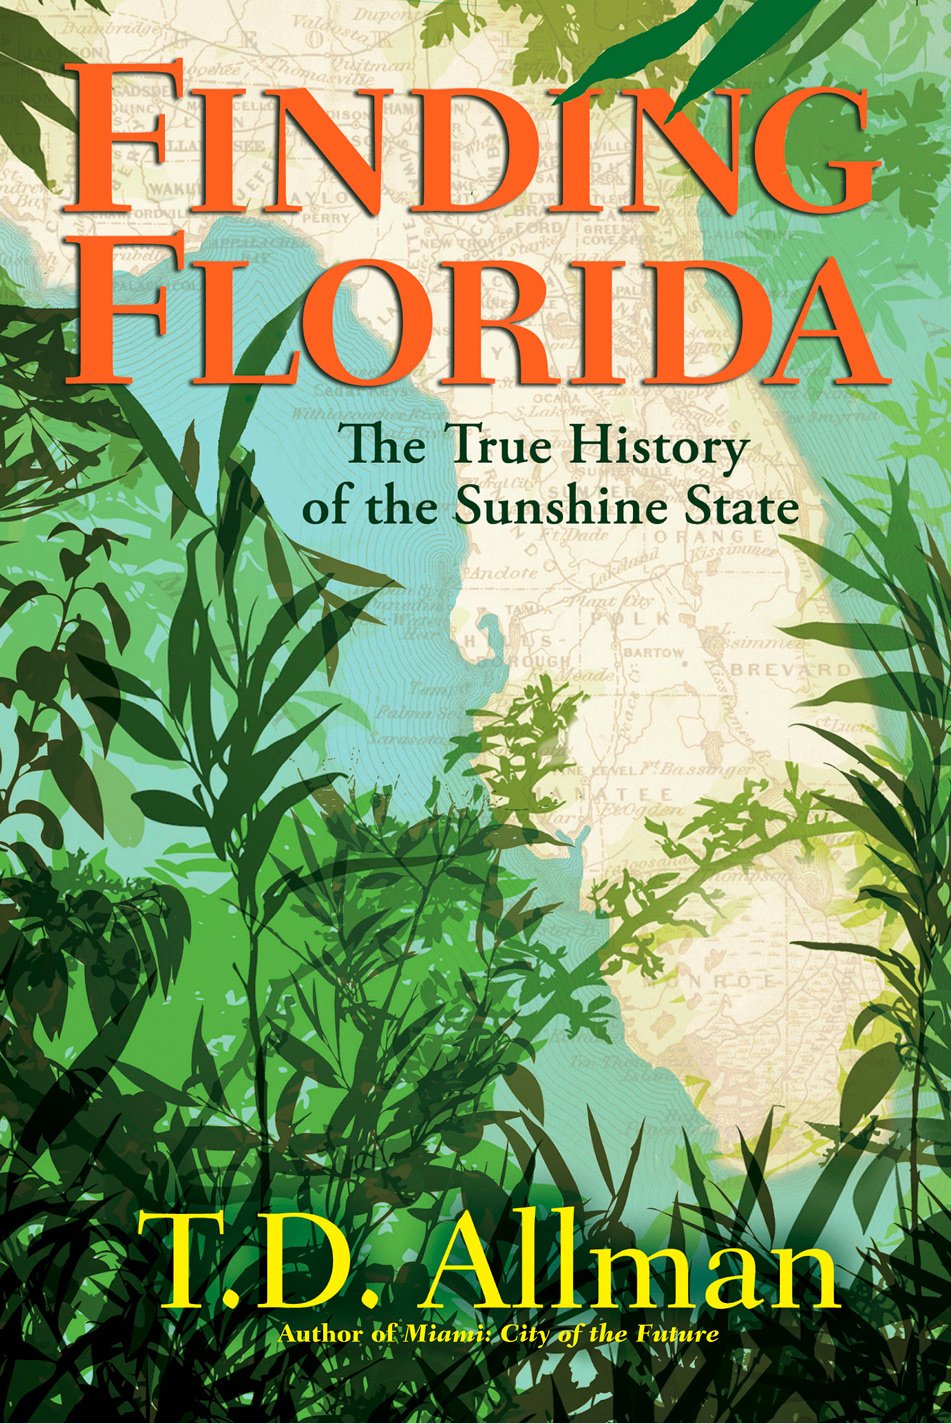 Finding Florida: The True History of the Sunshine State